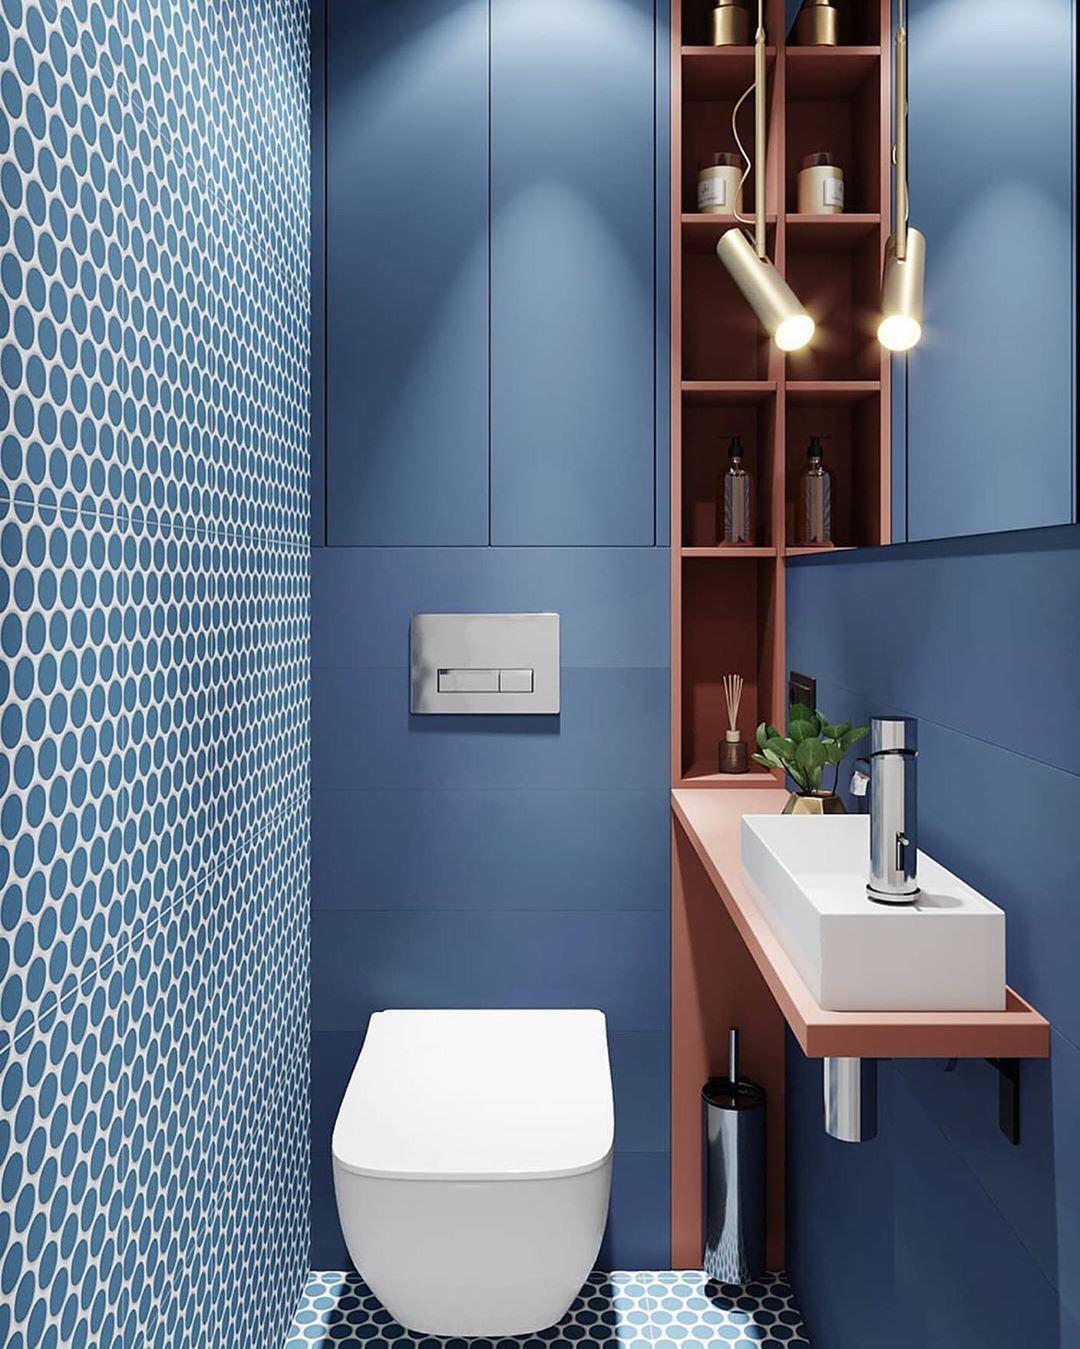 drikke skadedyr chef 6 Simple & Clever Bathroom Design Ideas For Small Spaces - Design Authority